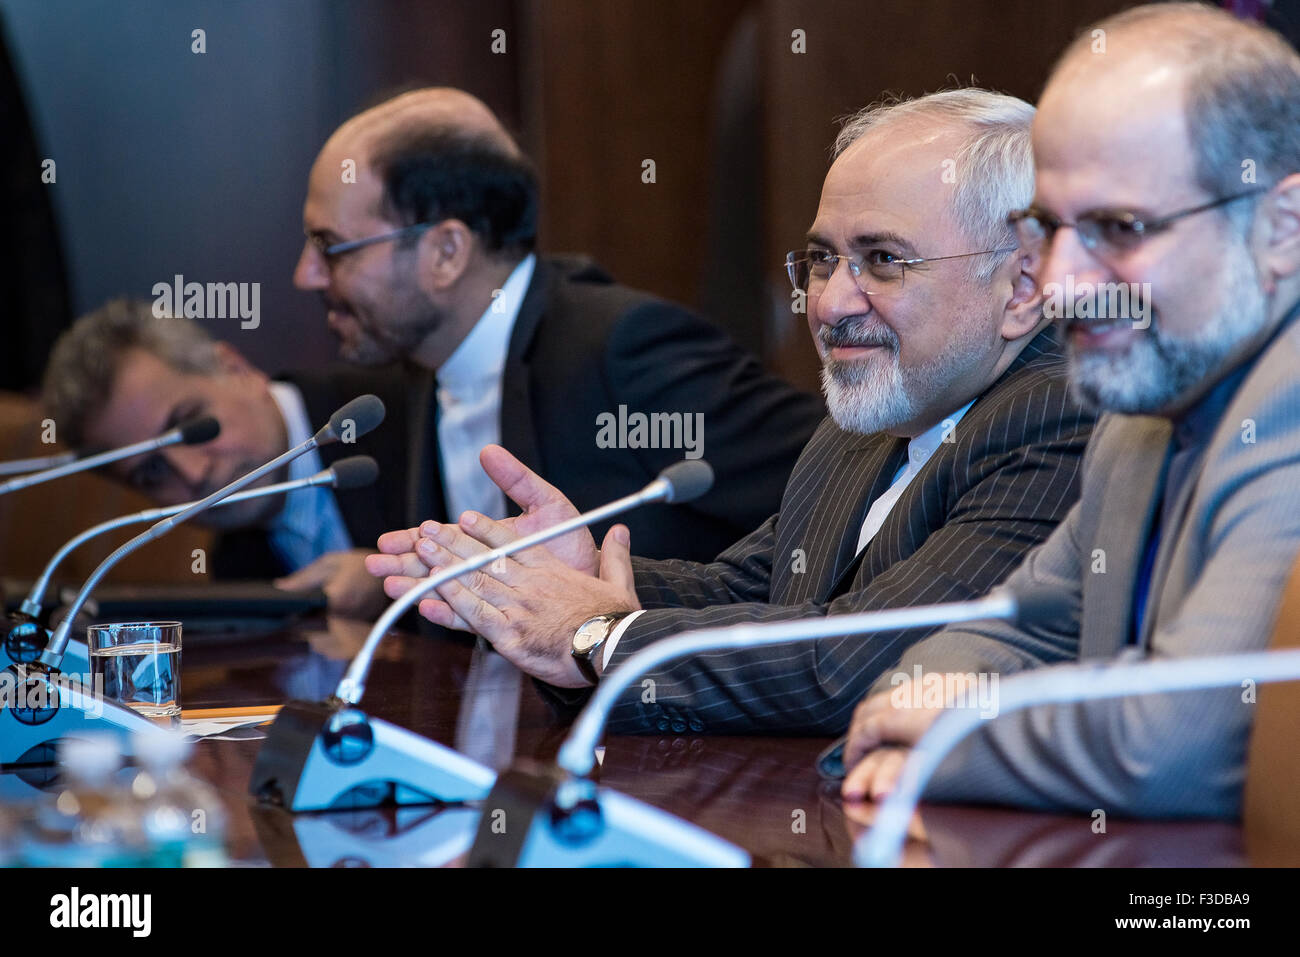 New York, United States. 05th Oct, 2015. Iranian Foreign Minister Javad Zarif sits at the Secretary-General's conference table. Secretary-General Ban Ki-moon greets Iranian Foreign Minister Javad Zarif. © Albin Lohr-Jones/Pacific Press/Alamy Live News Stock Photo